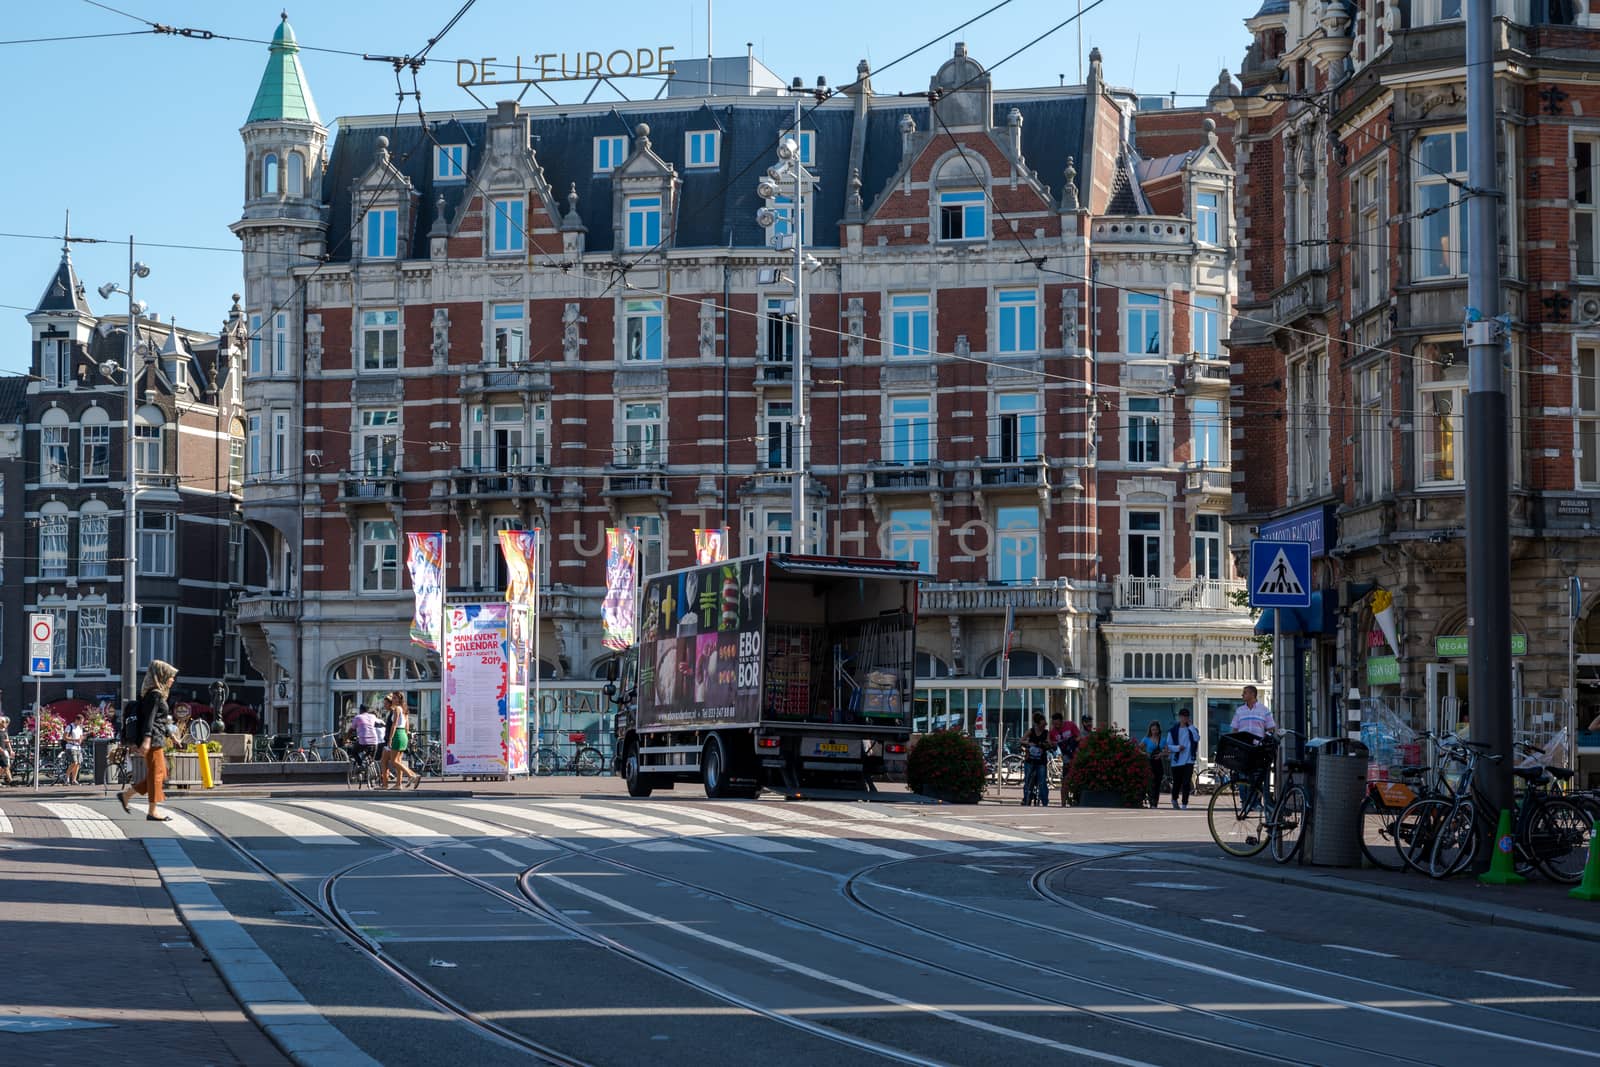 Busy Amsterdam Intersection by jfbenning